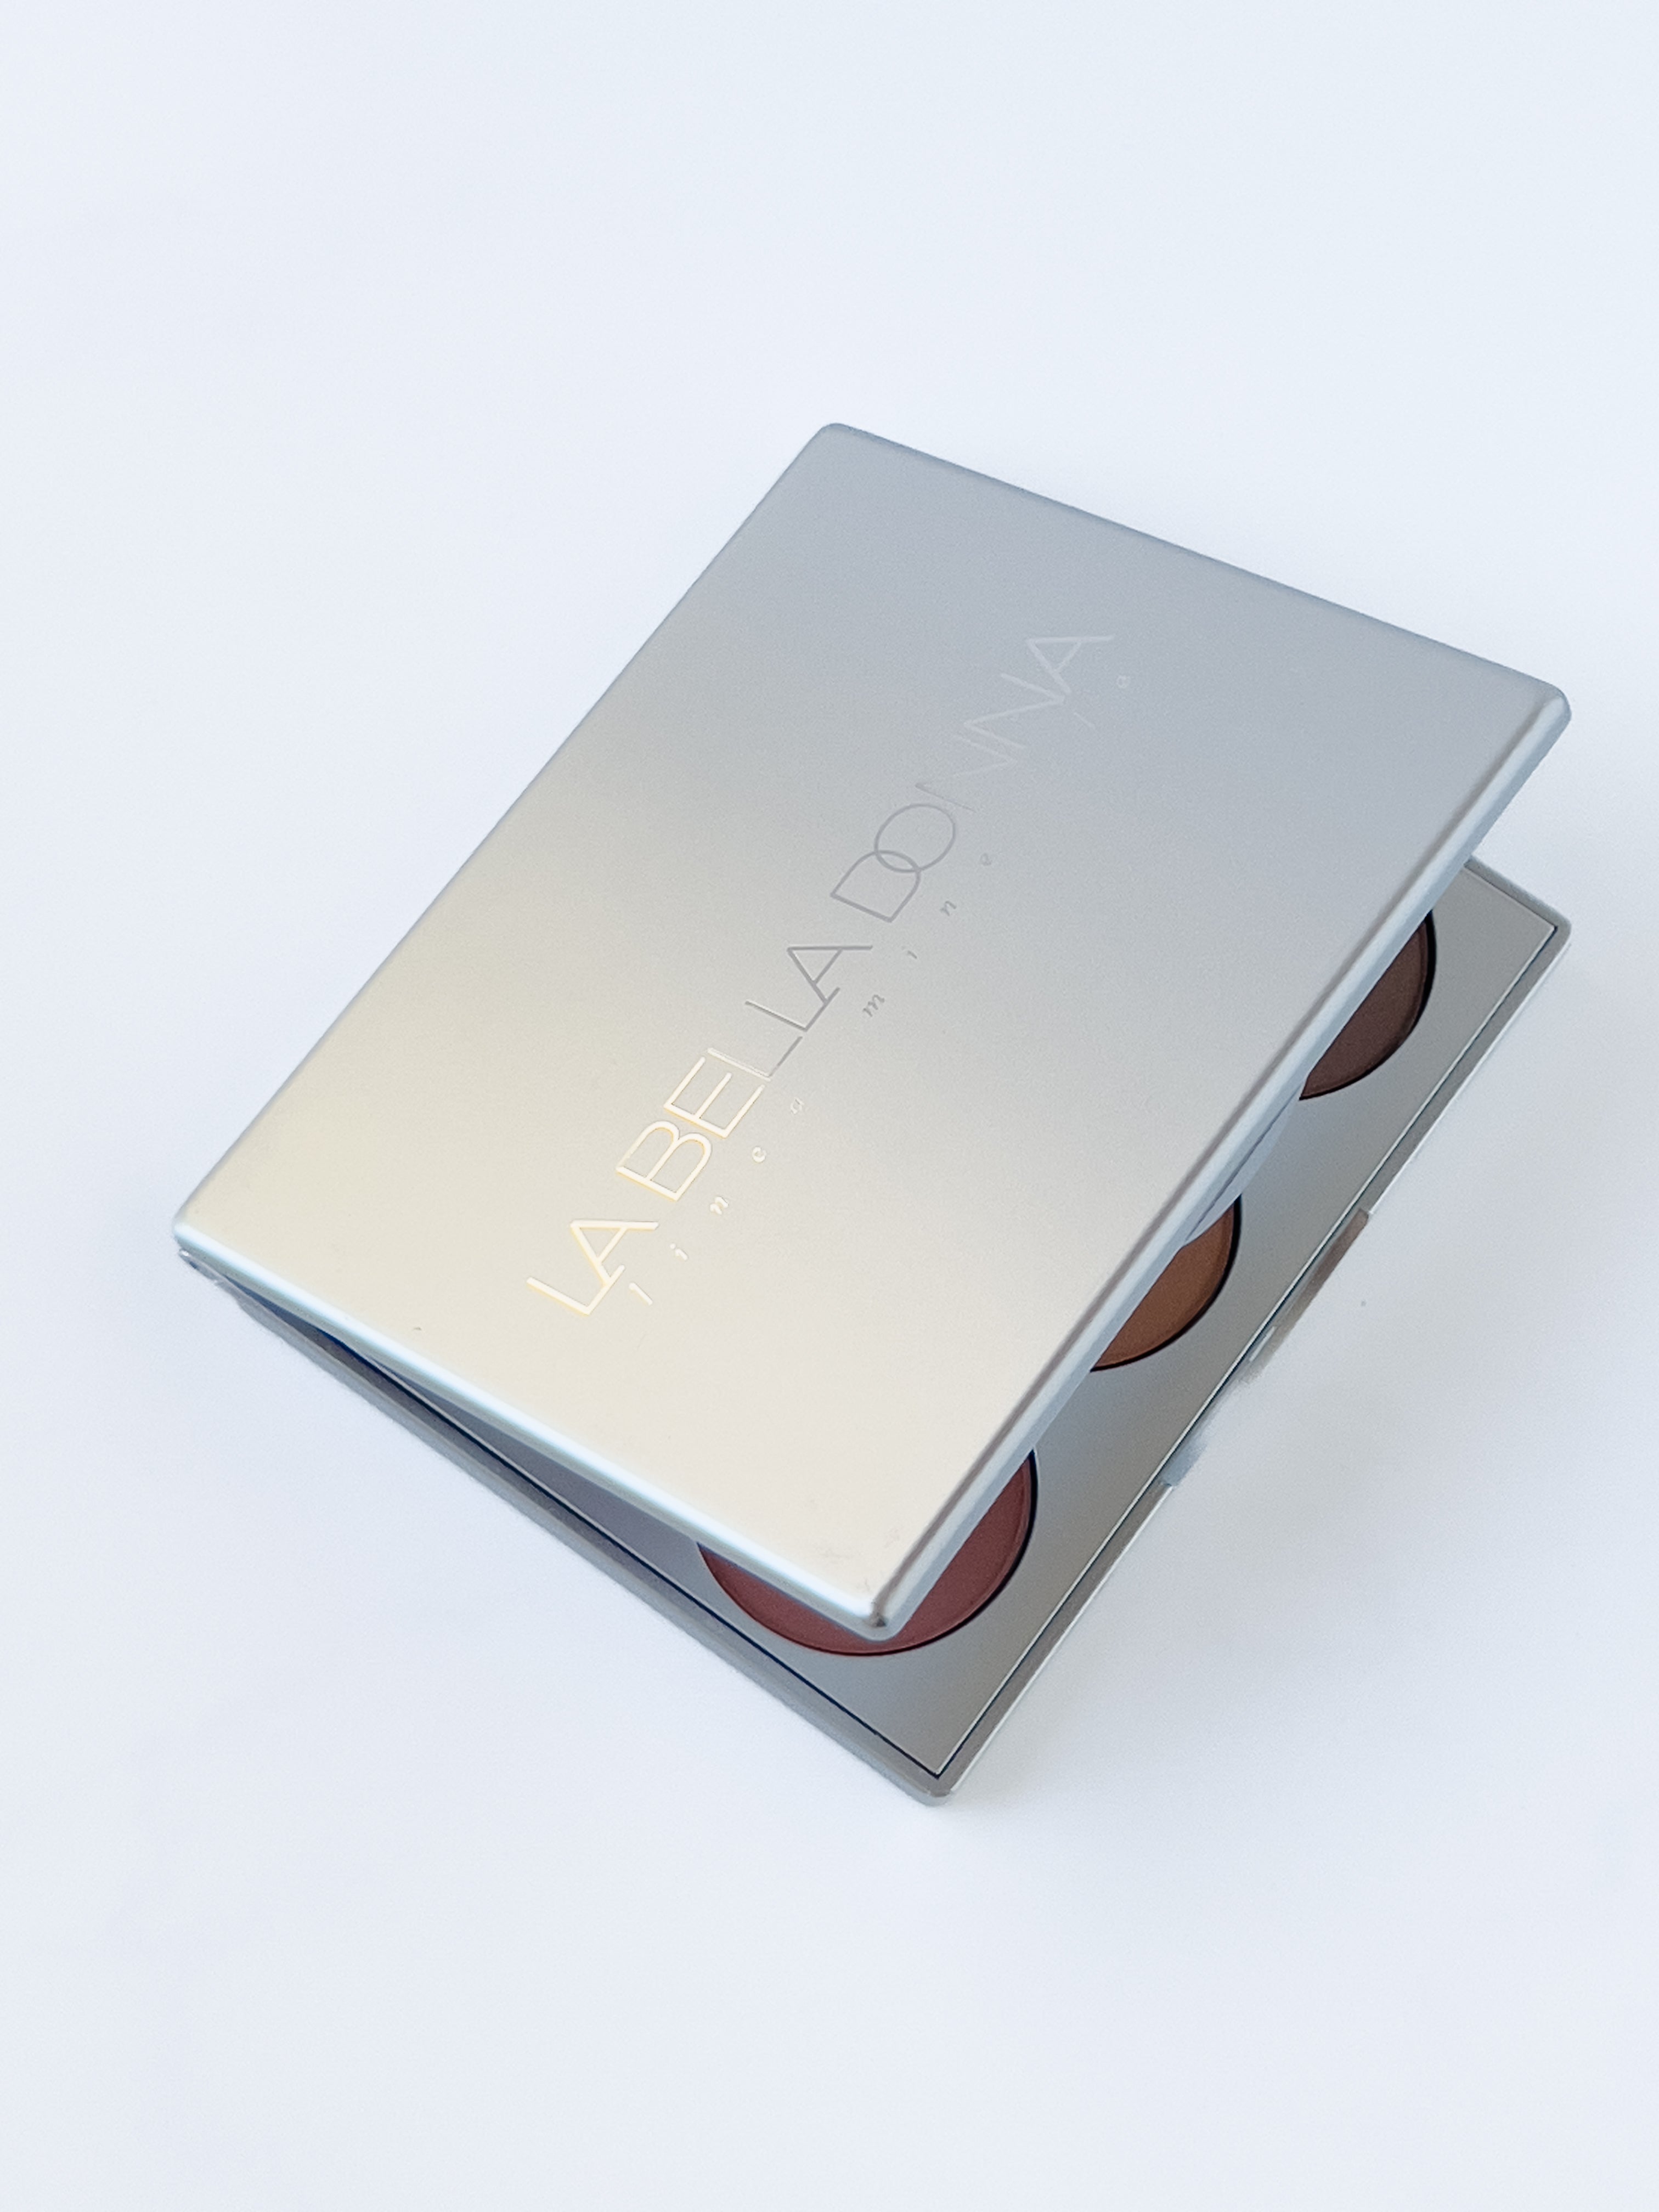 Rectangular silver positano mineral makeup palette shown partially closed